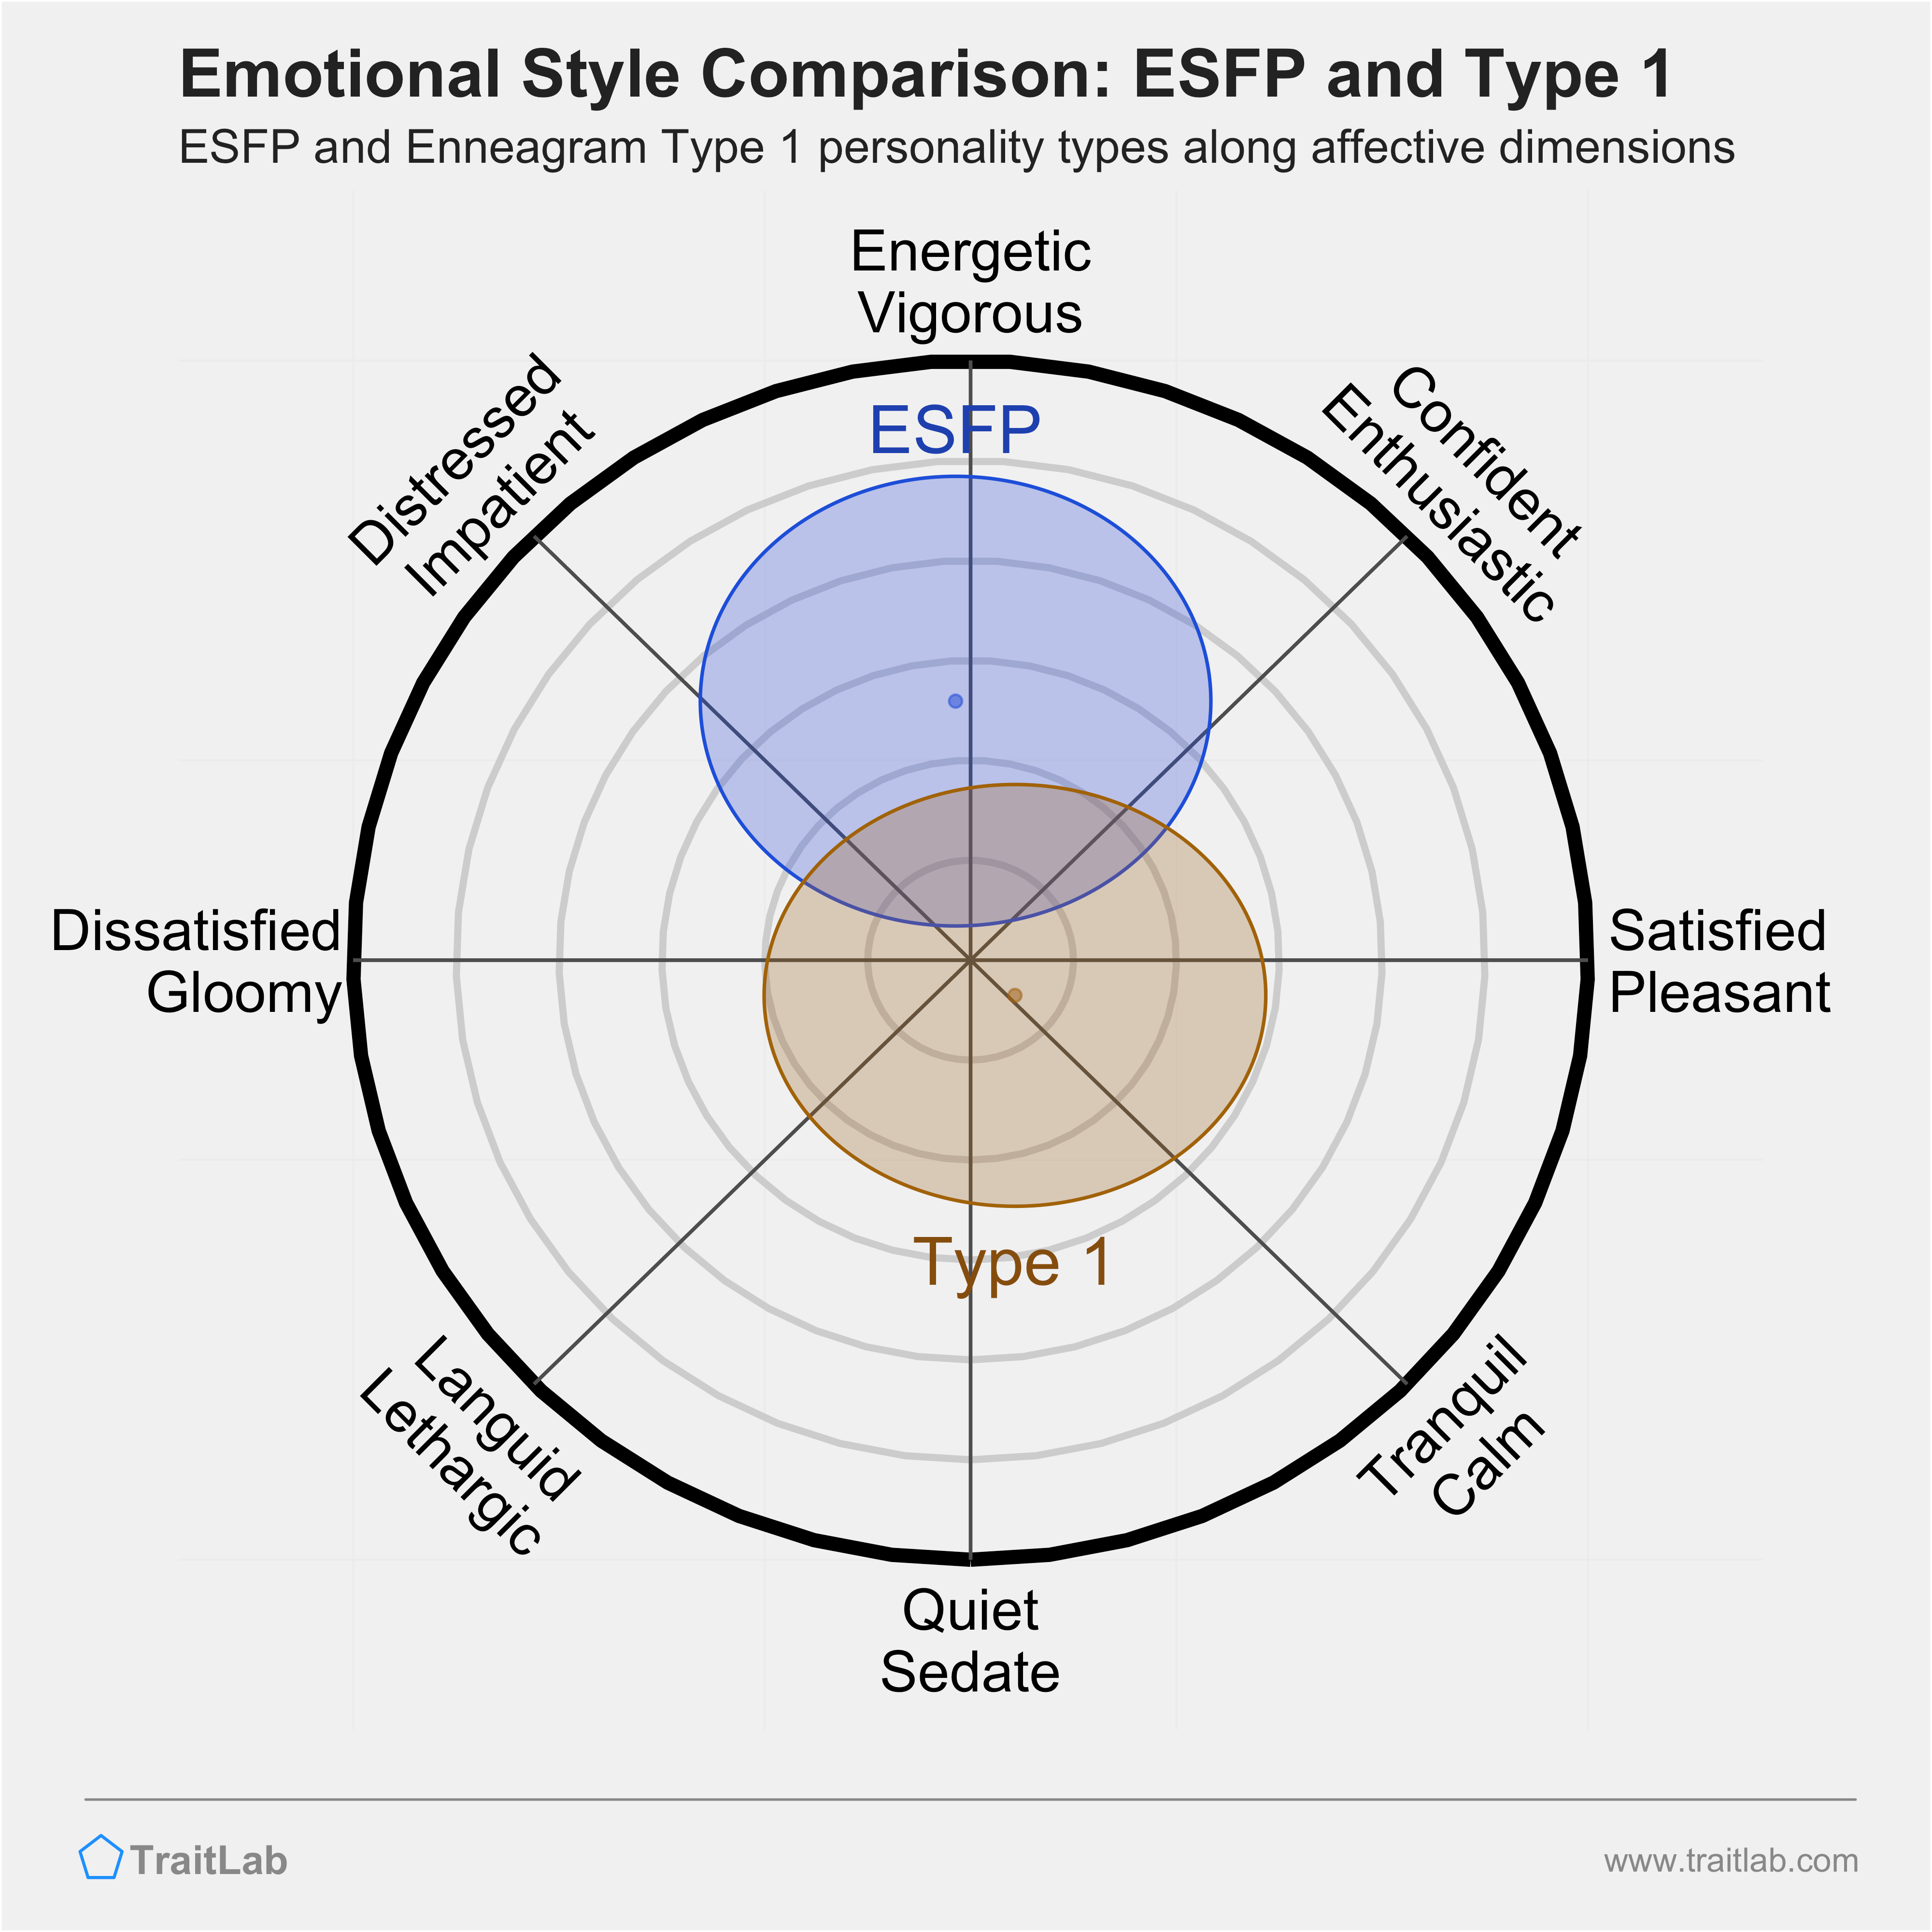 ESFP and Type 1 comparison across emotional (affective) dimensions